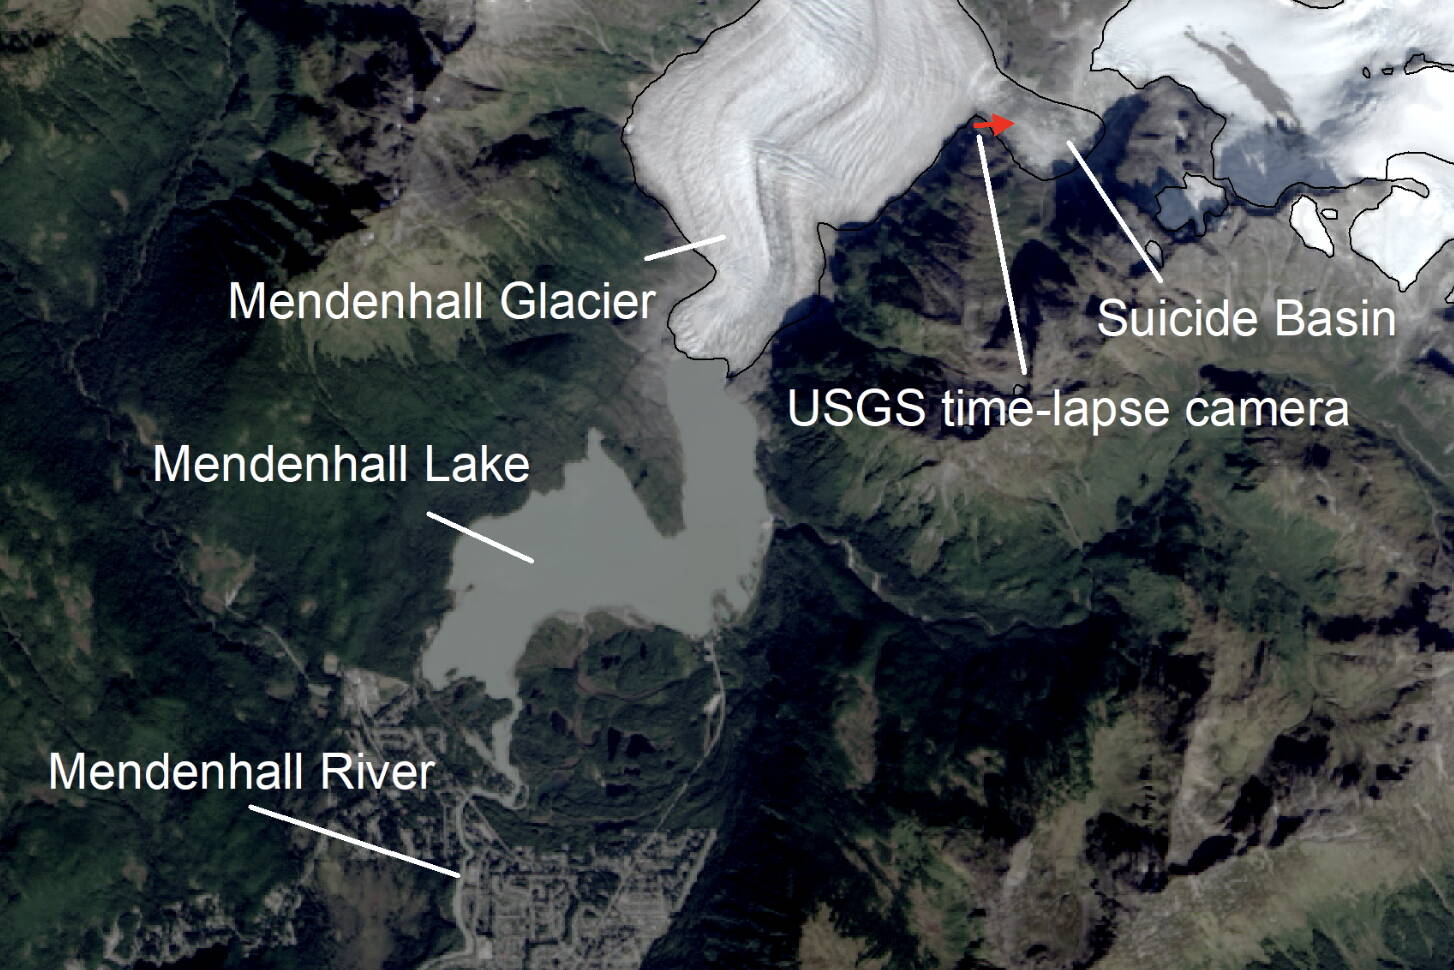 A map shows the location of Suicide Basin above the face of the Mendenhall Glacier, which since 2011 has released glacier lake outburst floods into Mendenhall Lake and Mendenhall River. An Alaska Wildlife Troopers official said Wednesday it appears water flow from the basin caused the death of Paul Jose Rodriguez Jr., who drowned while kayaking near the glacier about two weeks ago, and officials are waiting for another expected release before resuming the search for his body for safety reasons. (Map by the National Weather Service)